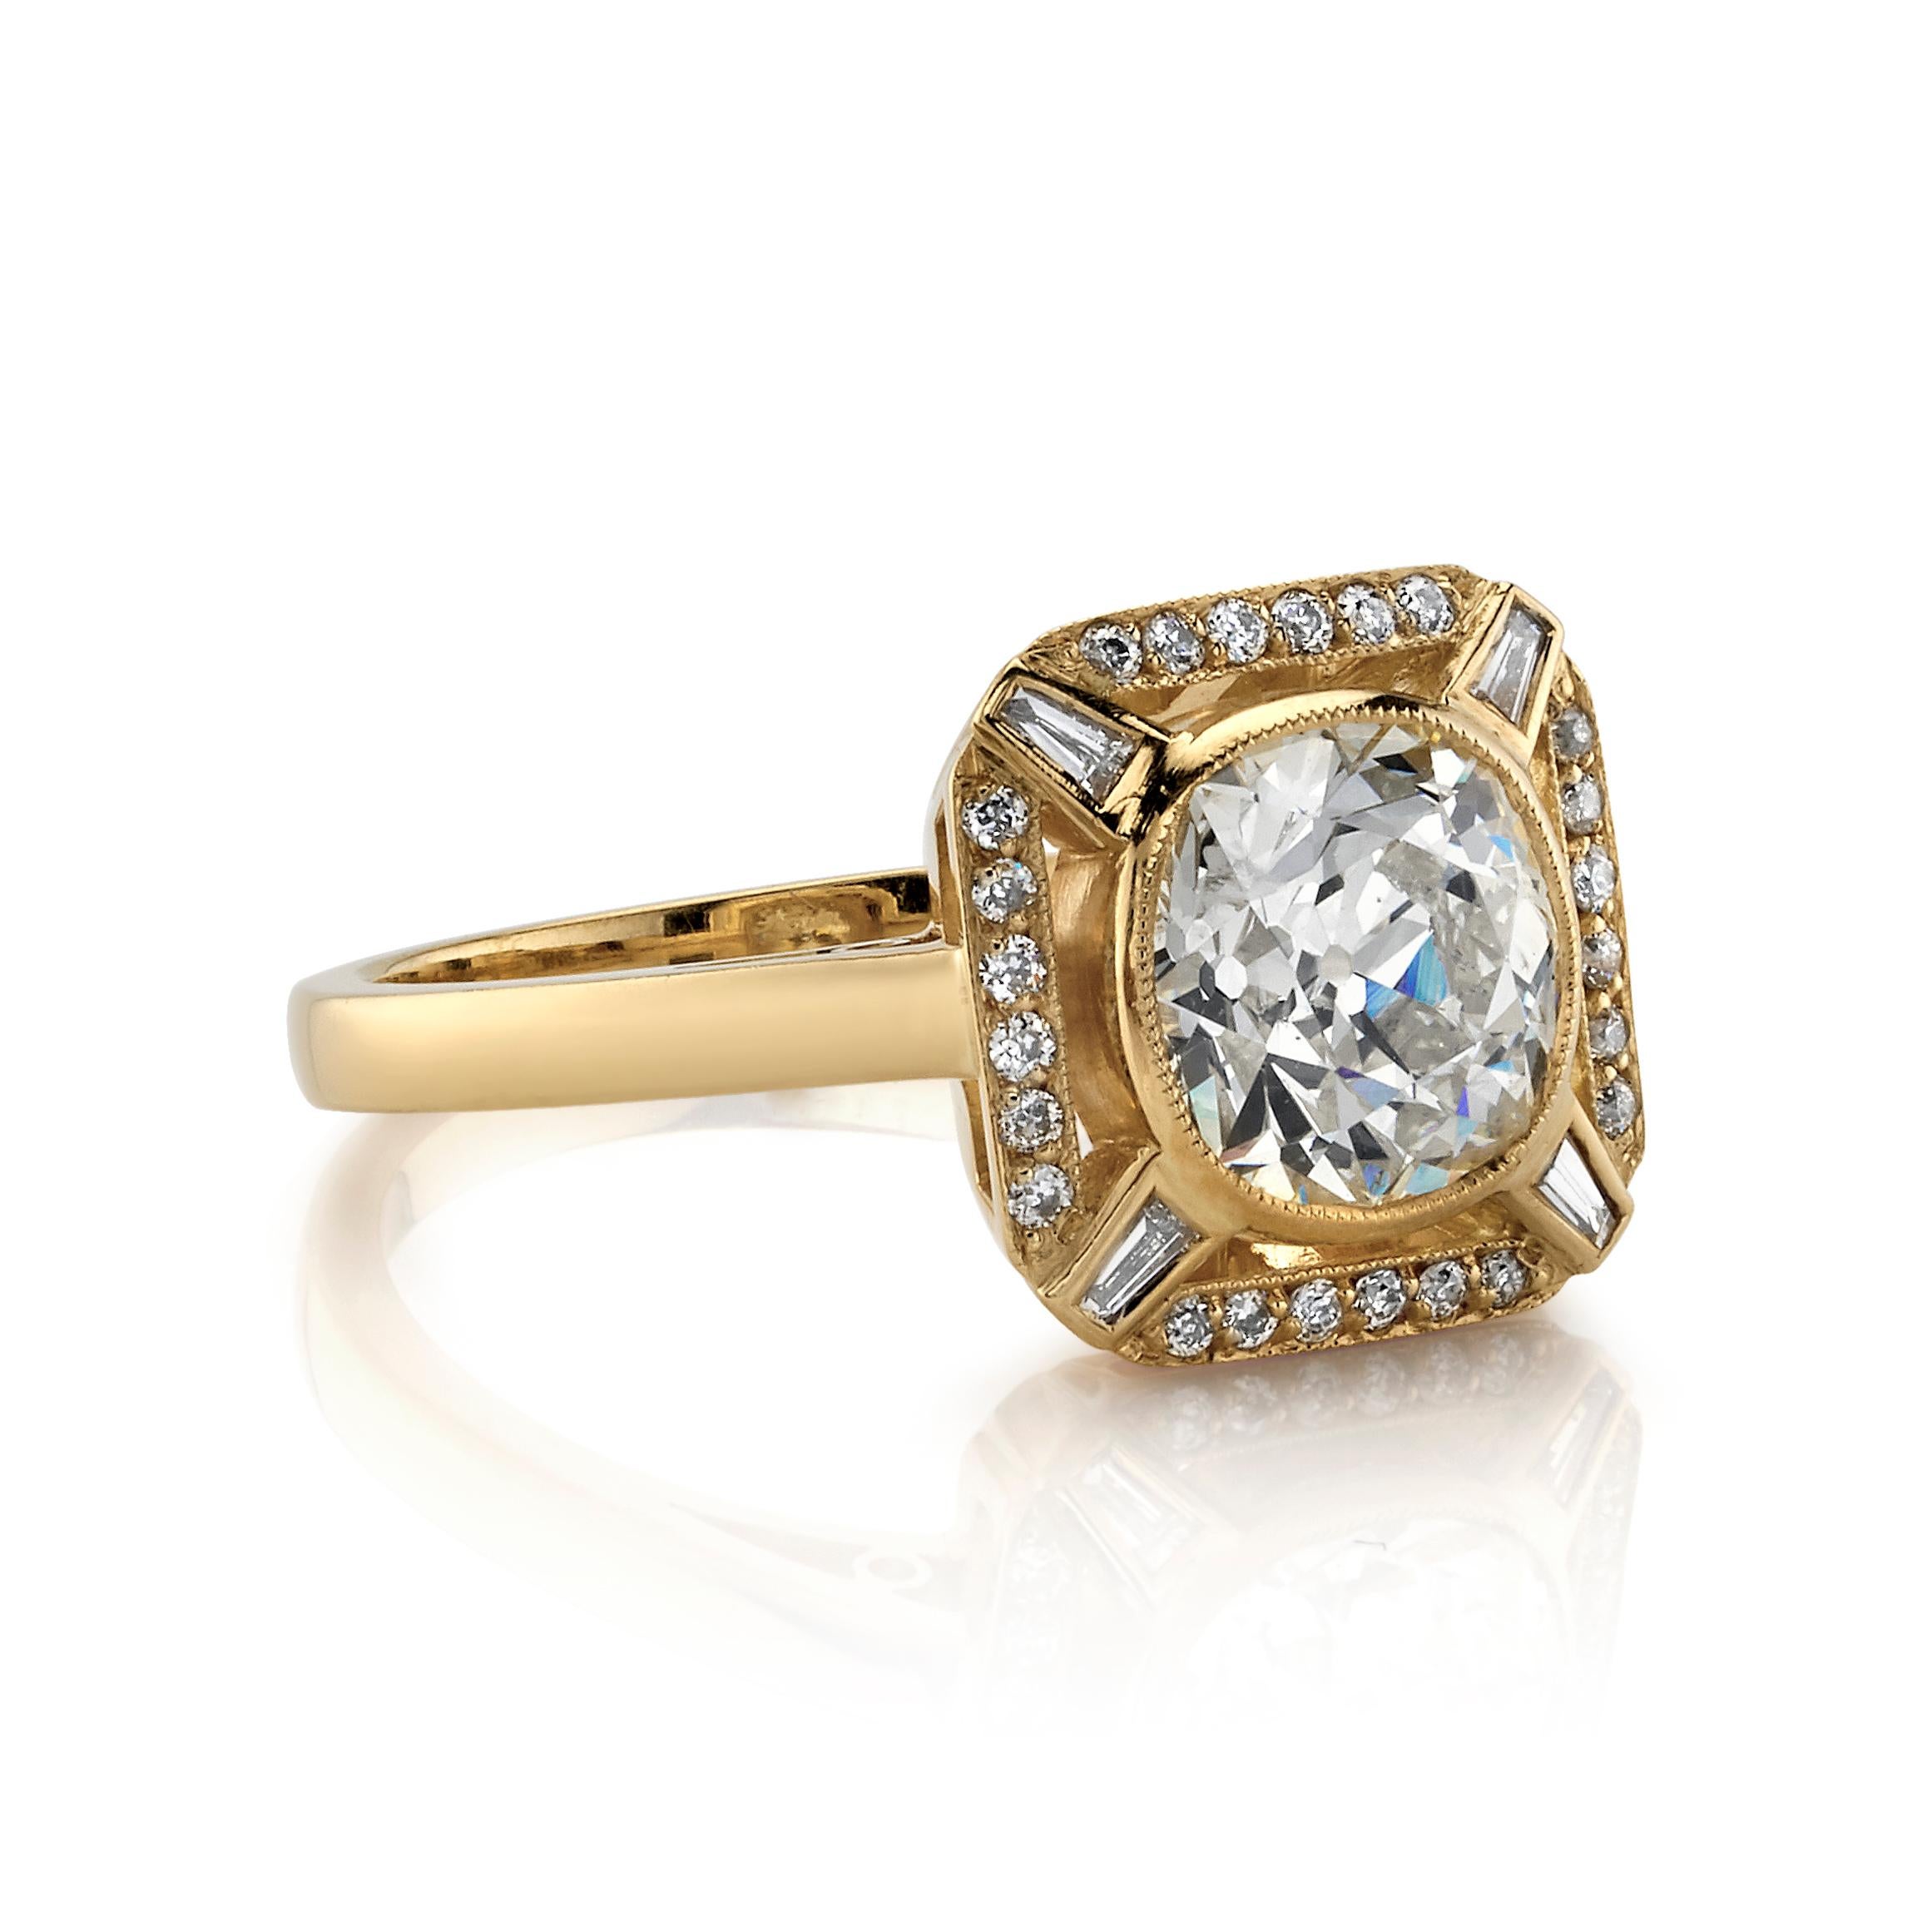 1.66ct K/SI1 EGL certified Cushion cut diamond with 0.19ctw accent diamonds set in a handcrafted 18k yellow gold ring. 

Ring is currently a size 6 and can be sized to fit.